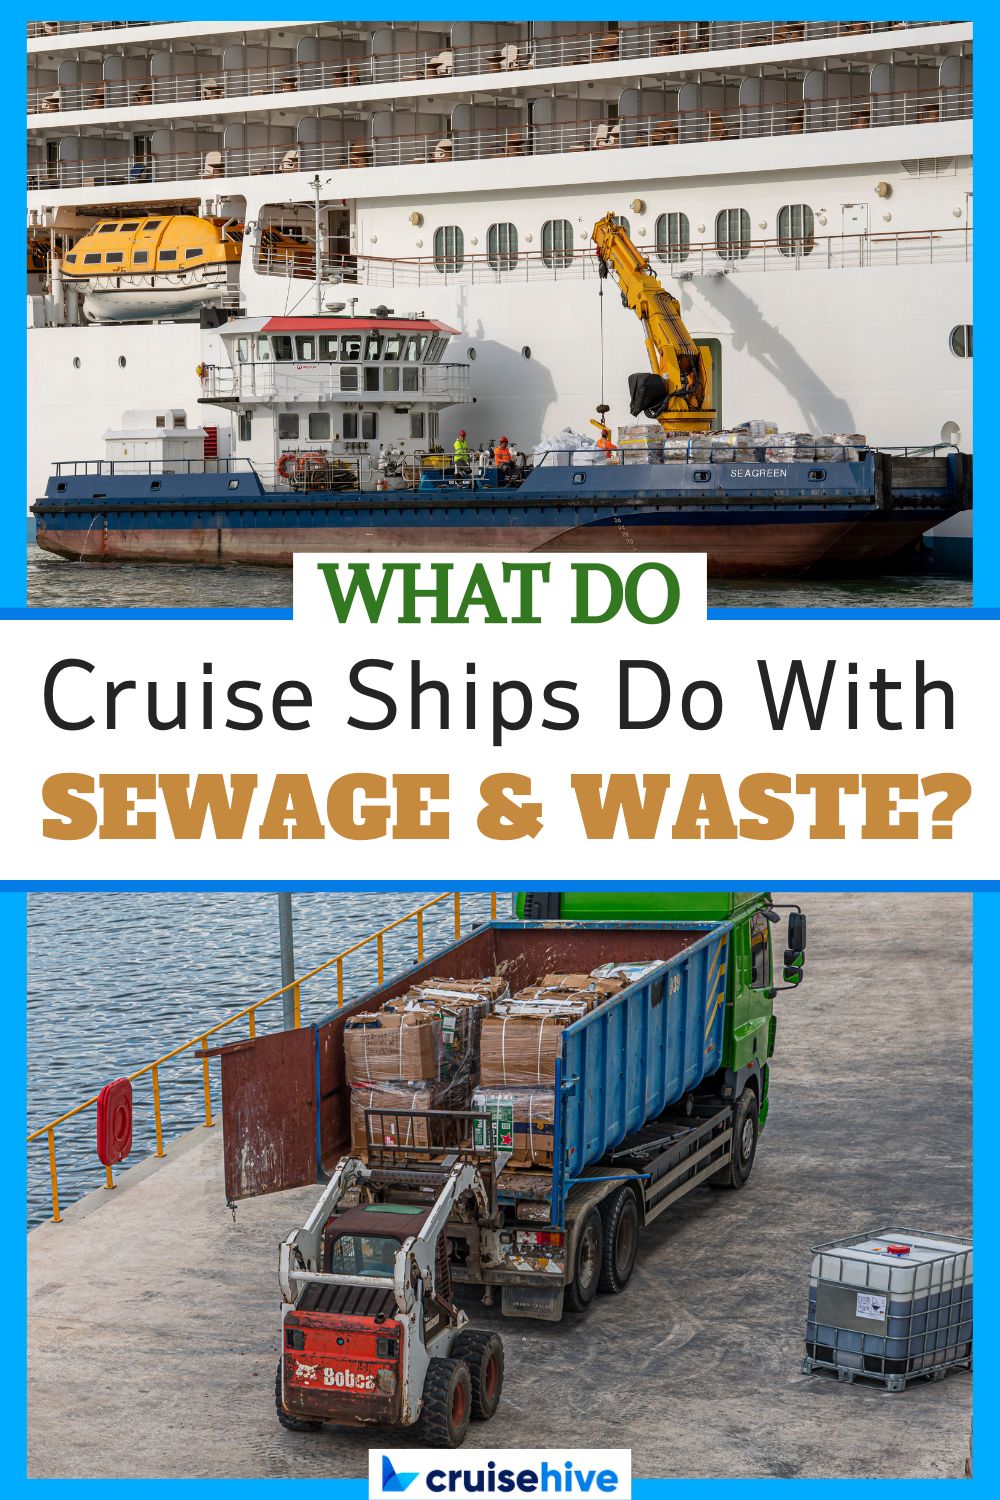 What do cruise ships do with sewage